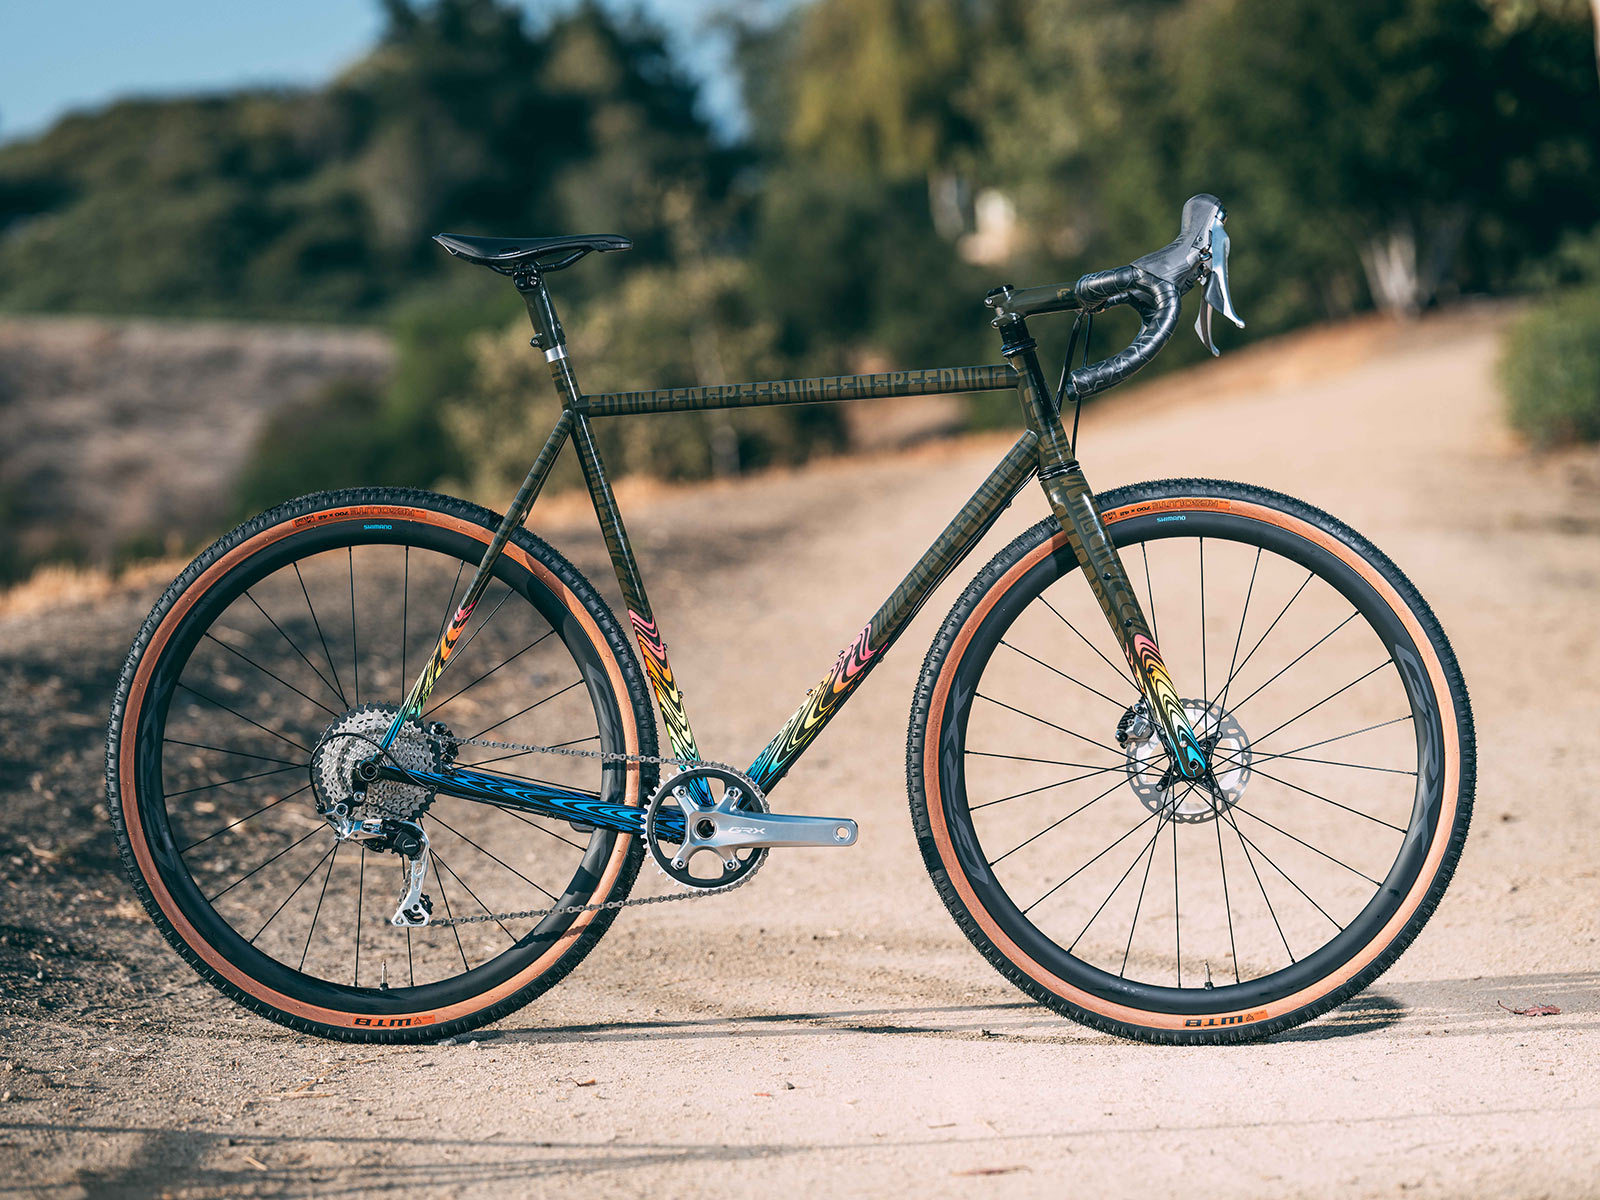 speedvagen custom steel gravel bike with shimano grx limited polished silver components